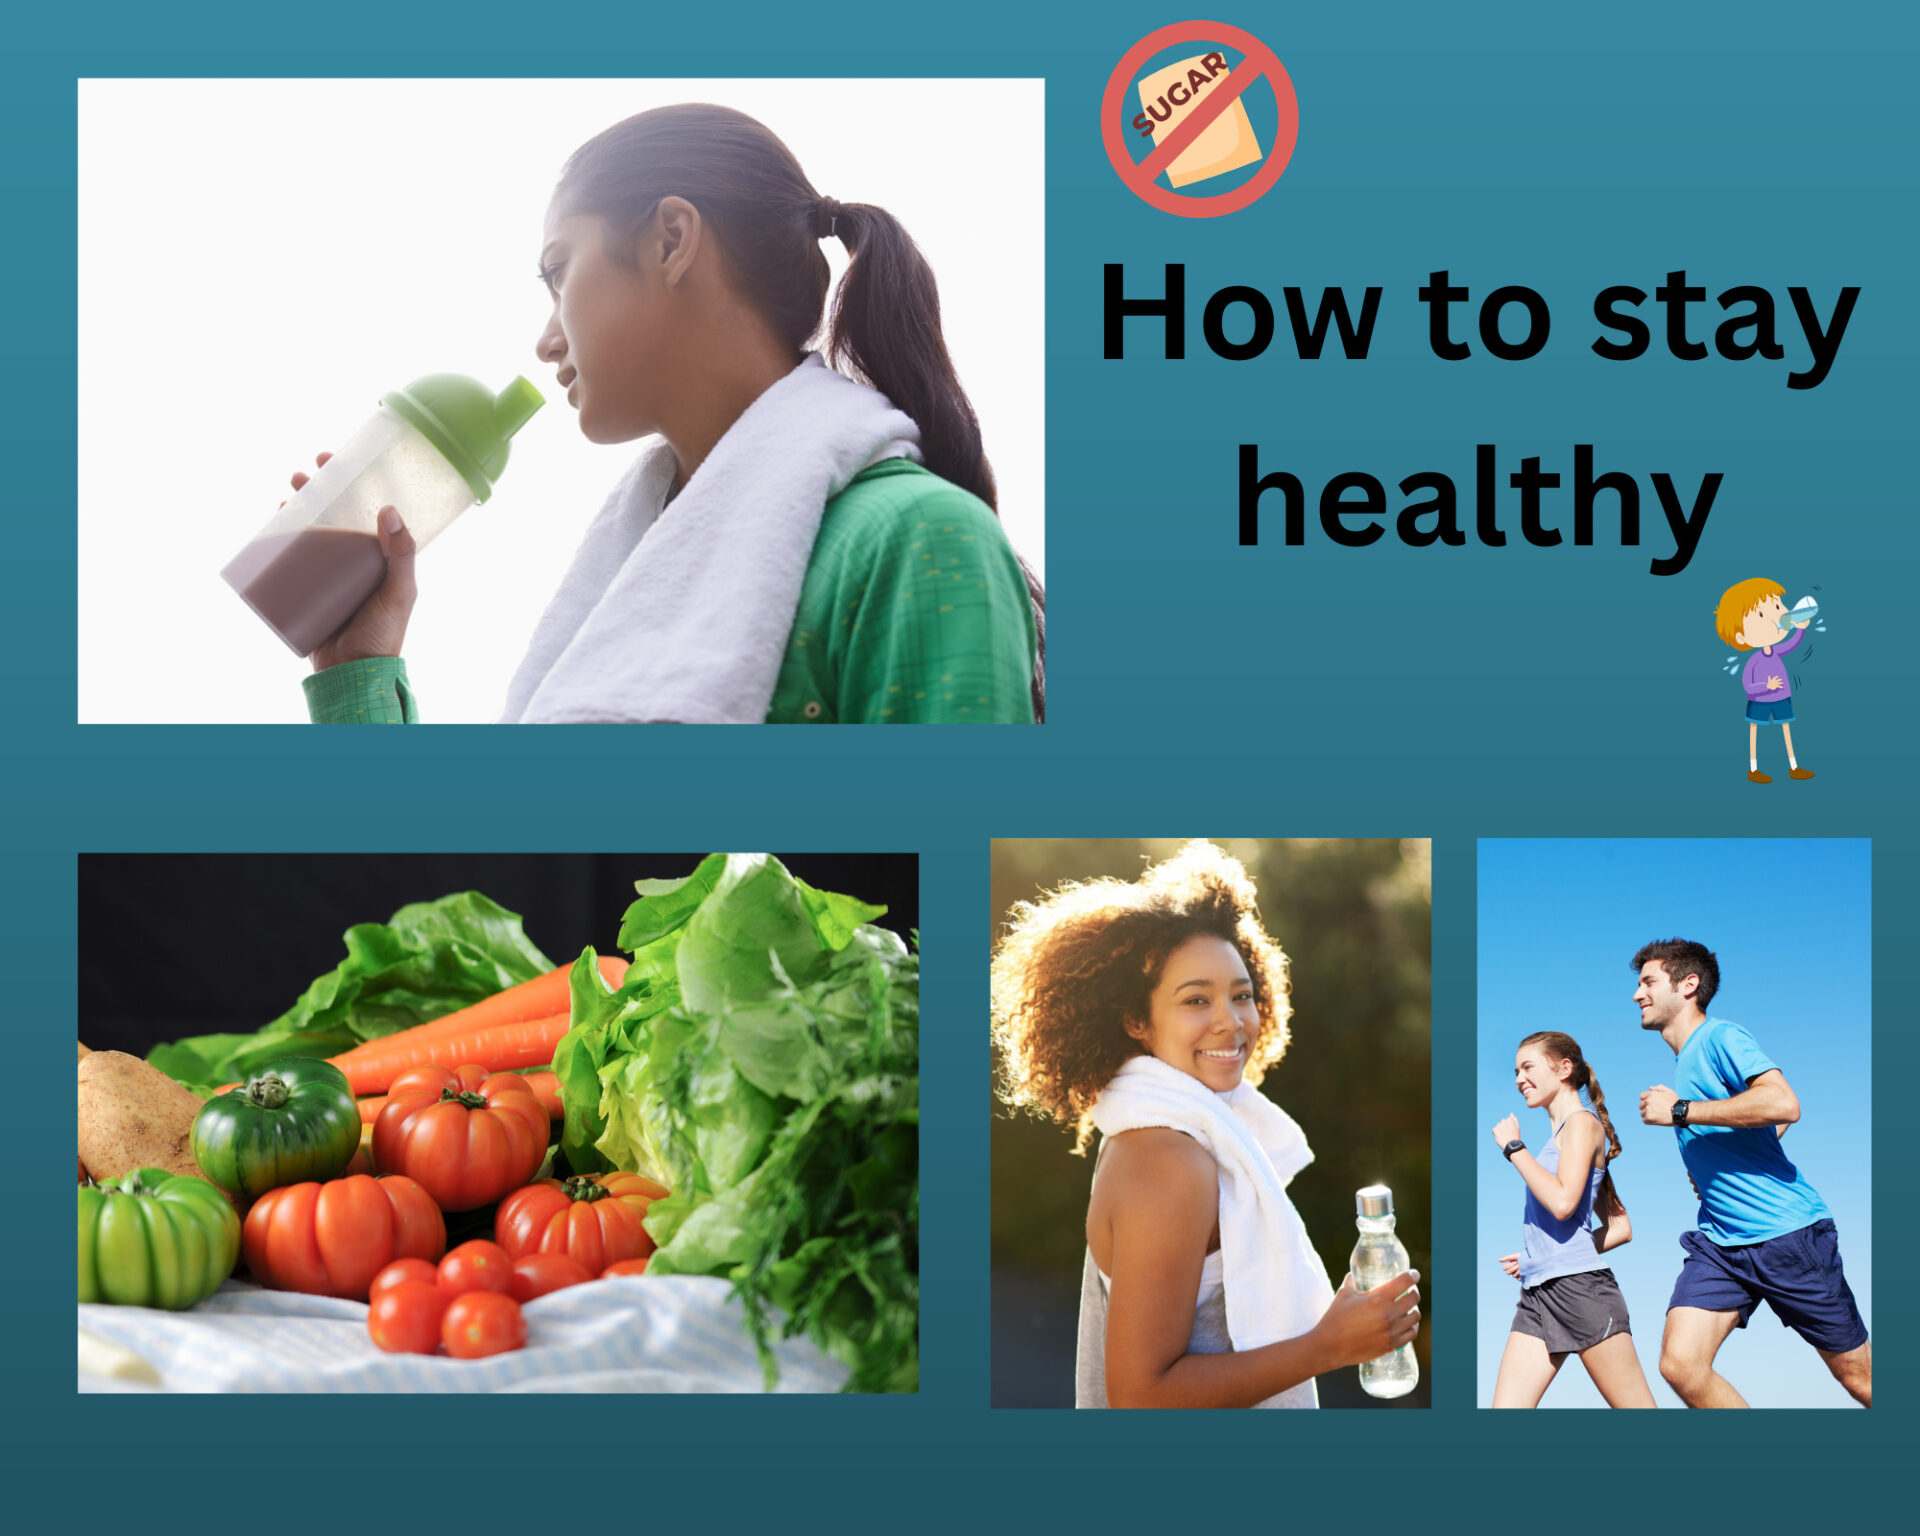 How to stay healthy